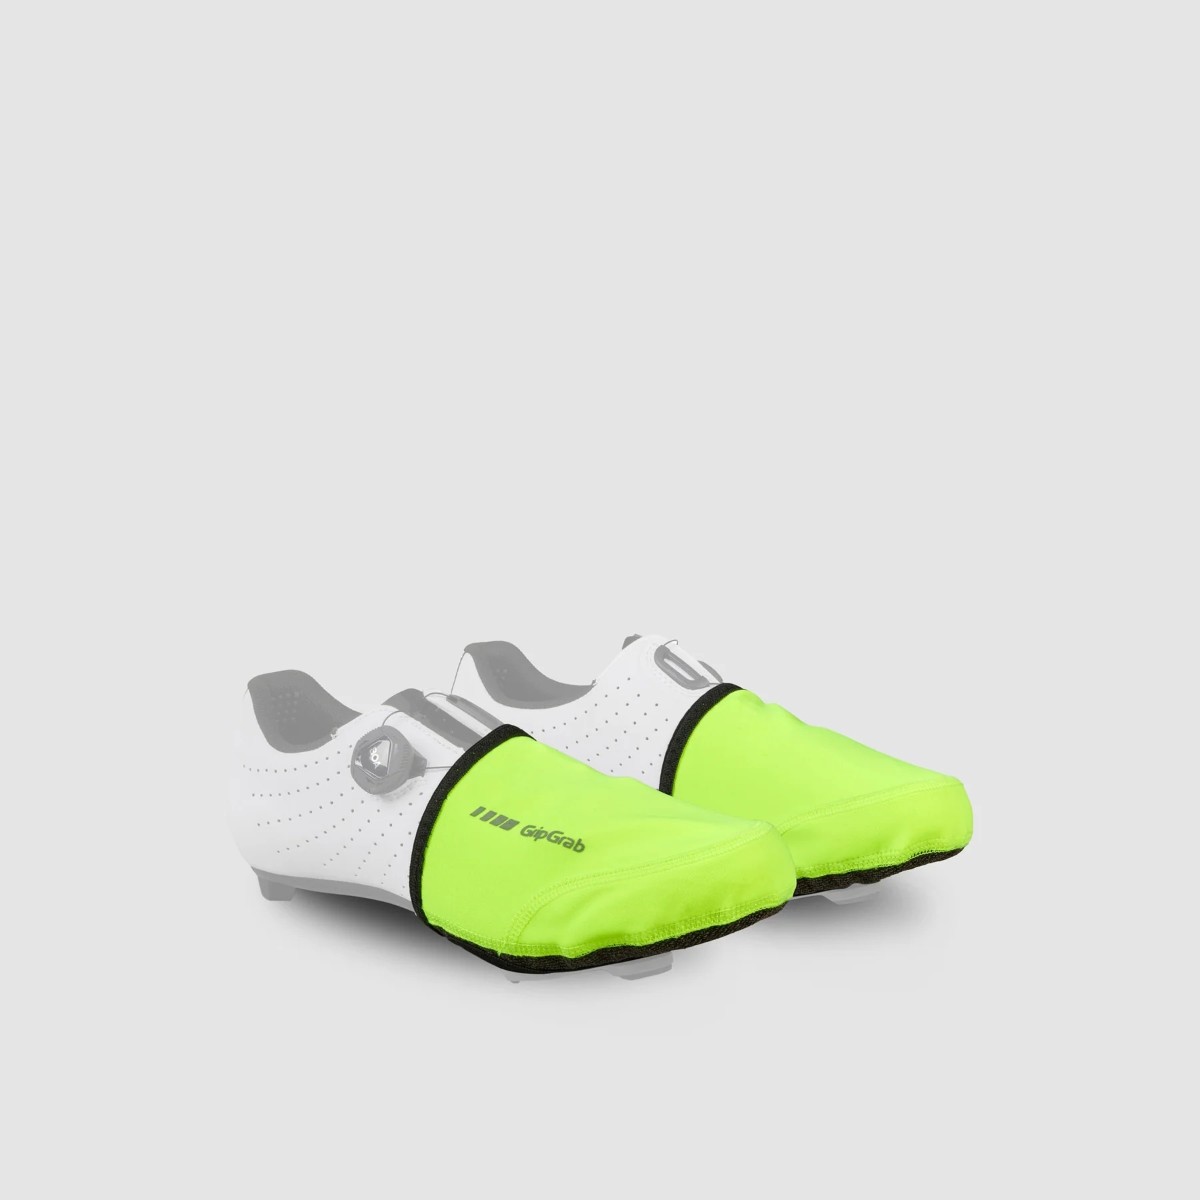 GripGrab Hi-Vis Windproof Road Toe Covers product image